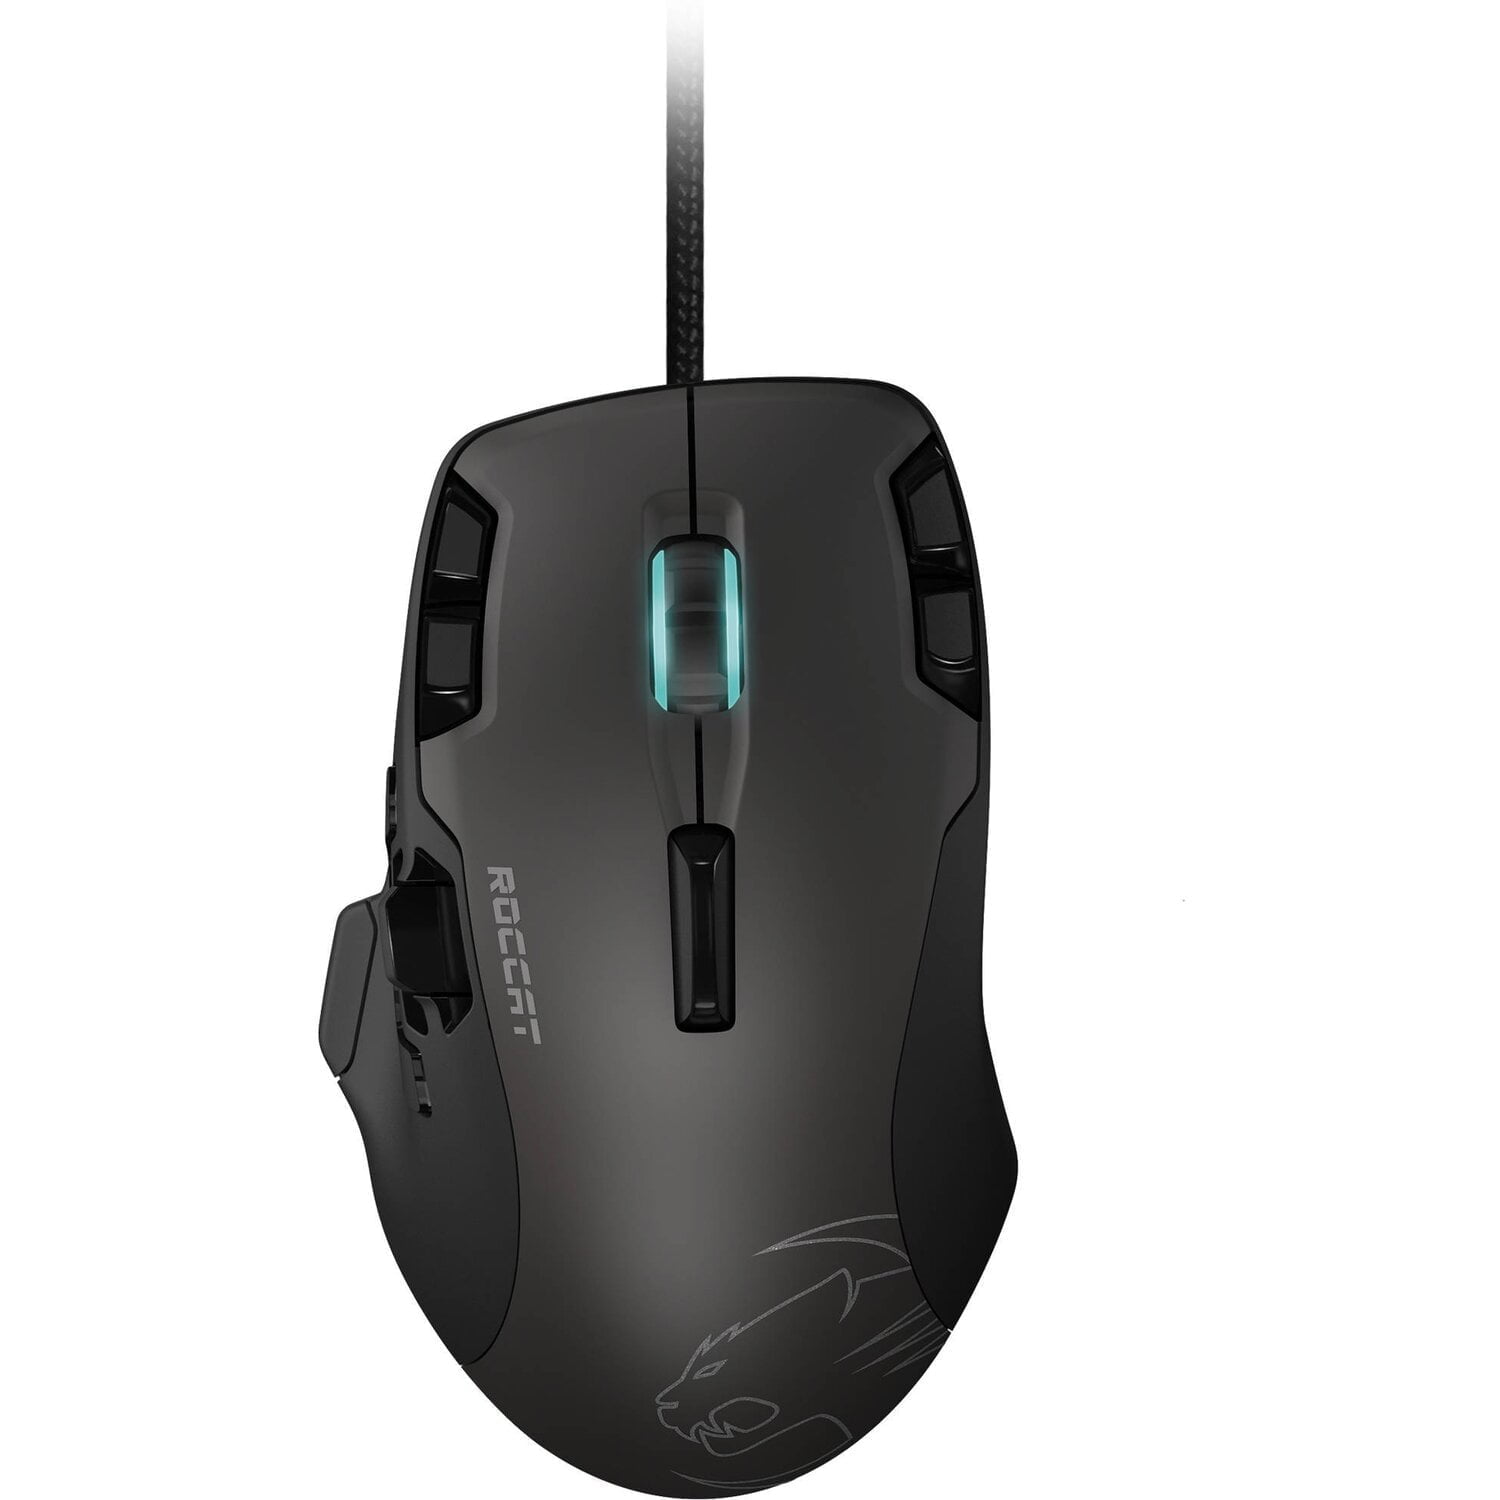 ROCCAT Tyon Review: The Multi-Button Expert